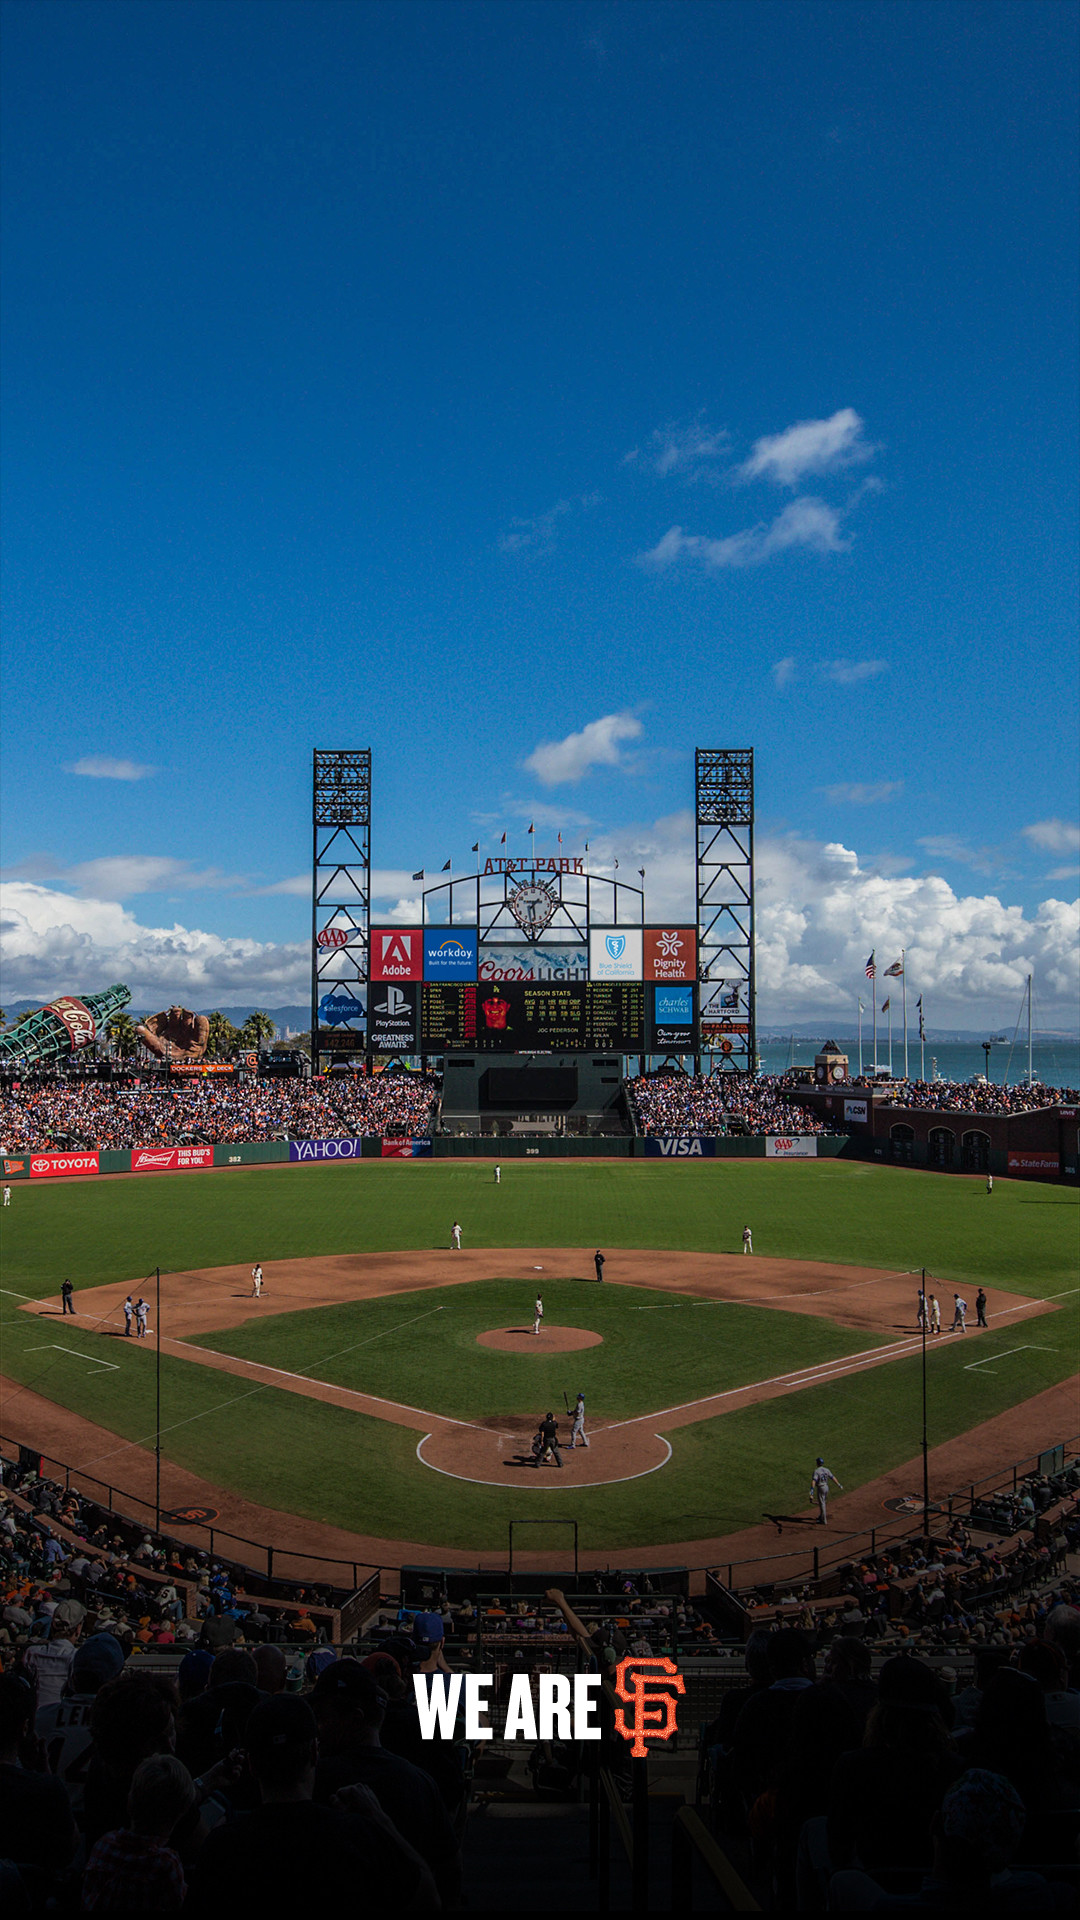 1080x1920 Wallpaper - AT&T Park. Download Now